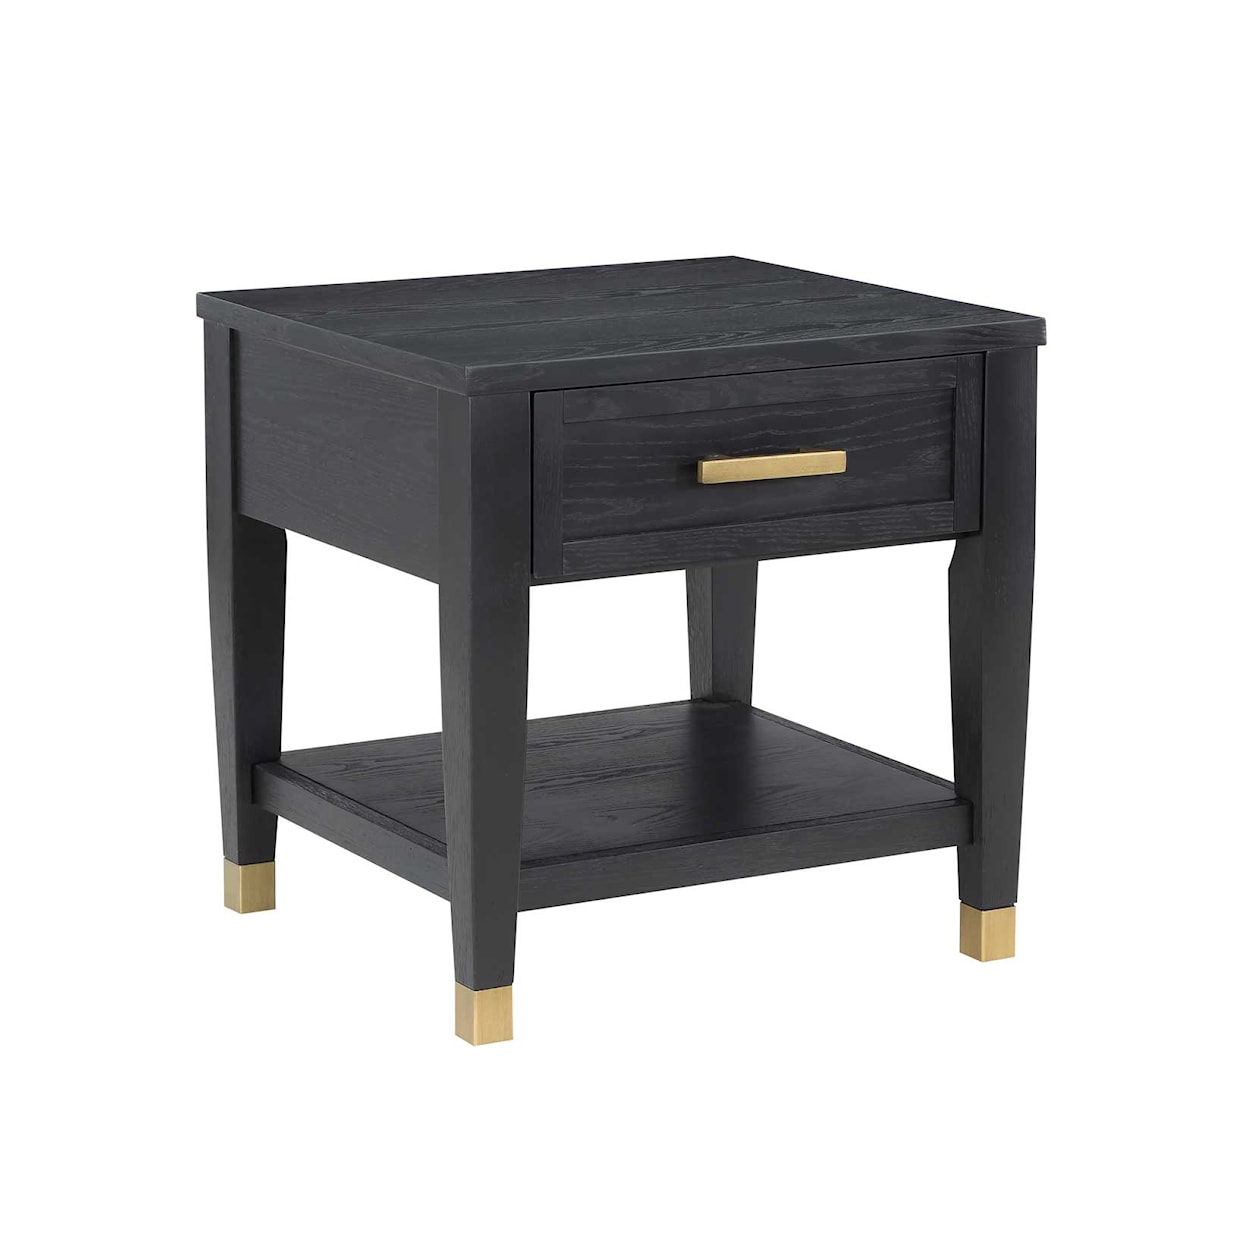 Steve Silver Eves EVES END TABLE |